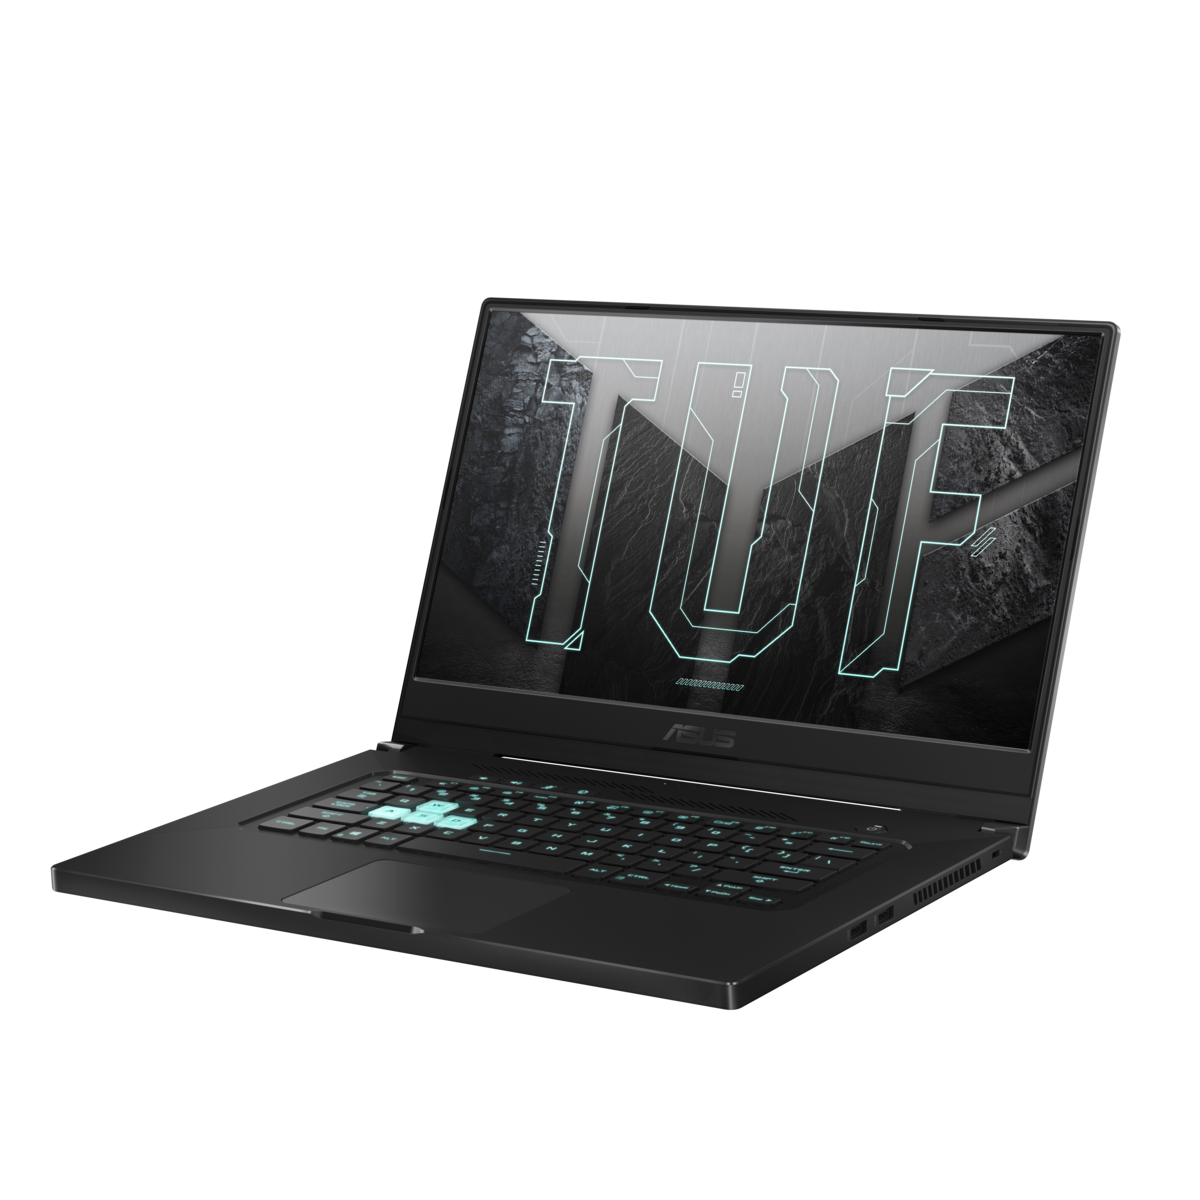 Asus launches the Asus TUF Gaming Dash F15 gaming laptop with Intel